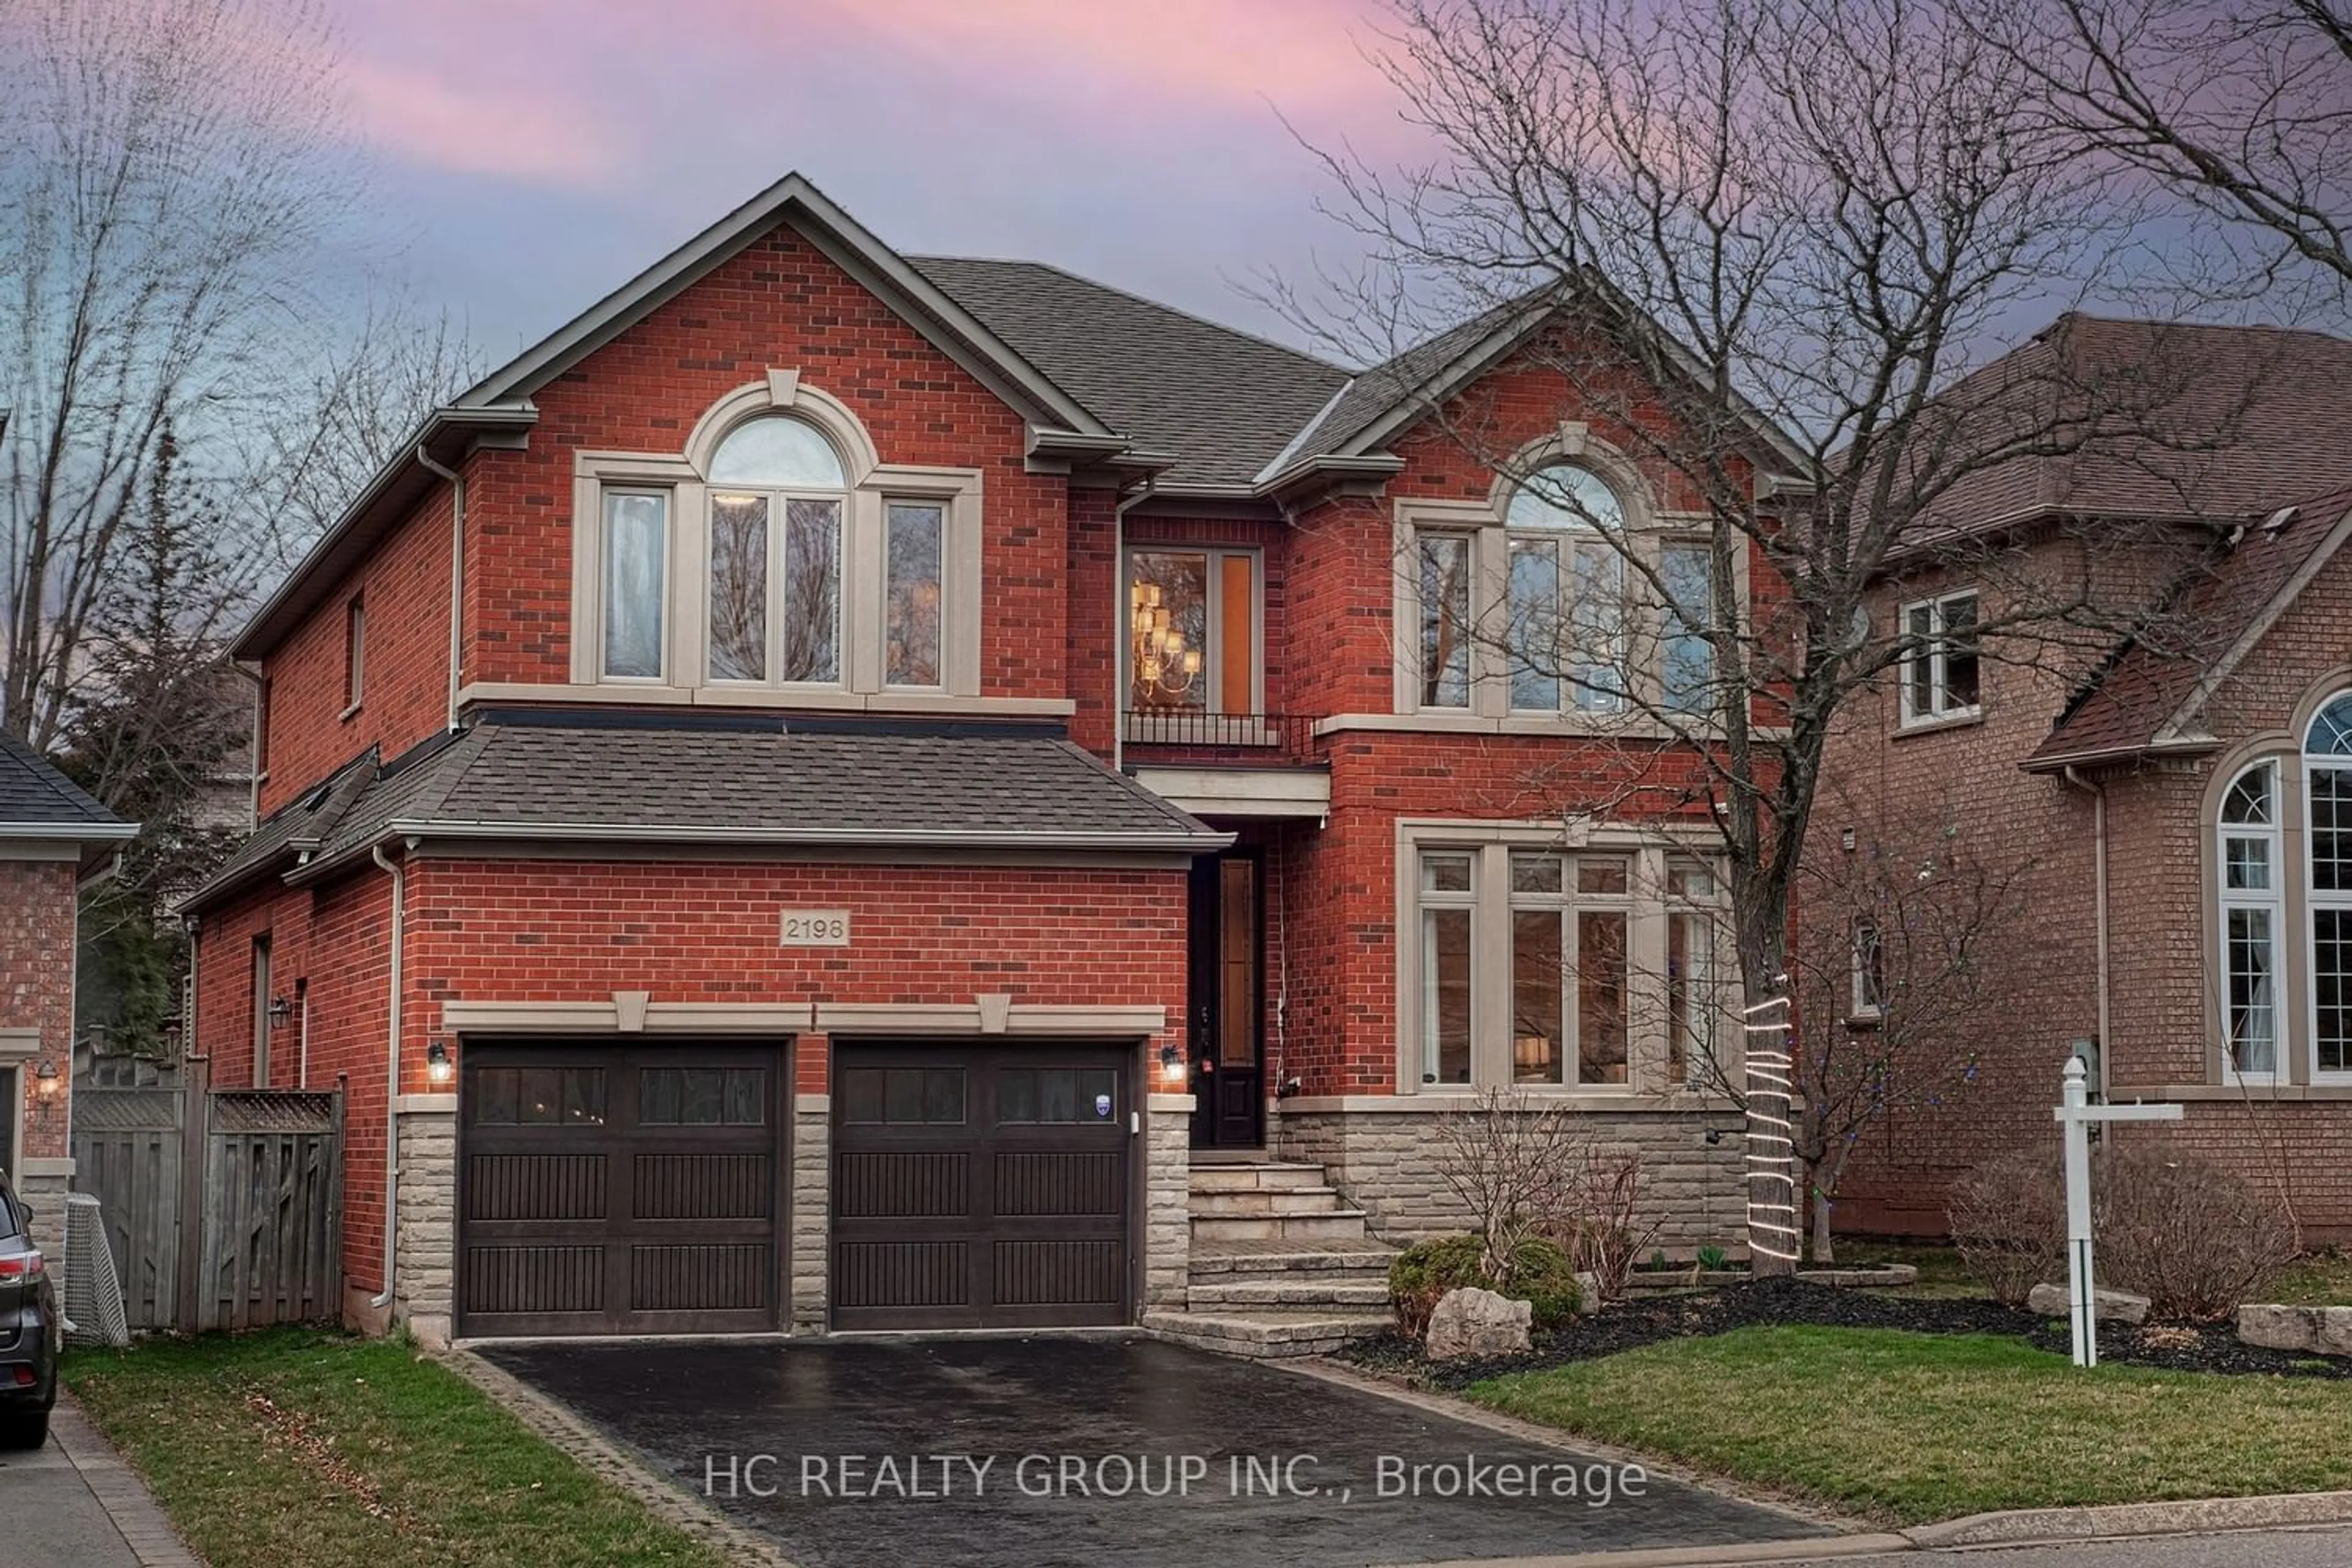 Home with brick exterior material for 2198 Galloway Dr, Oakville Ontario L6H 6T4